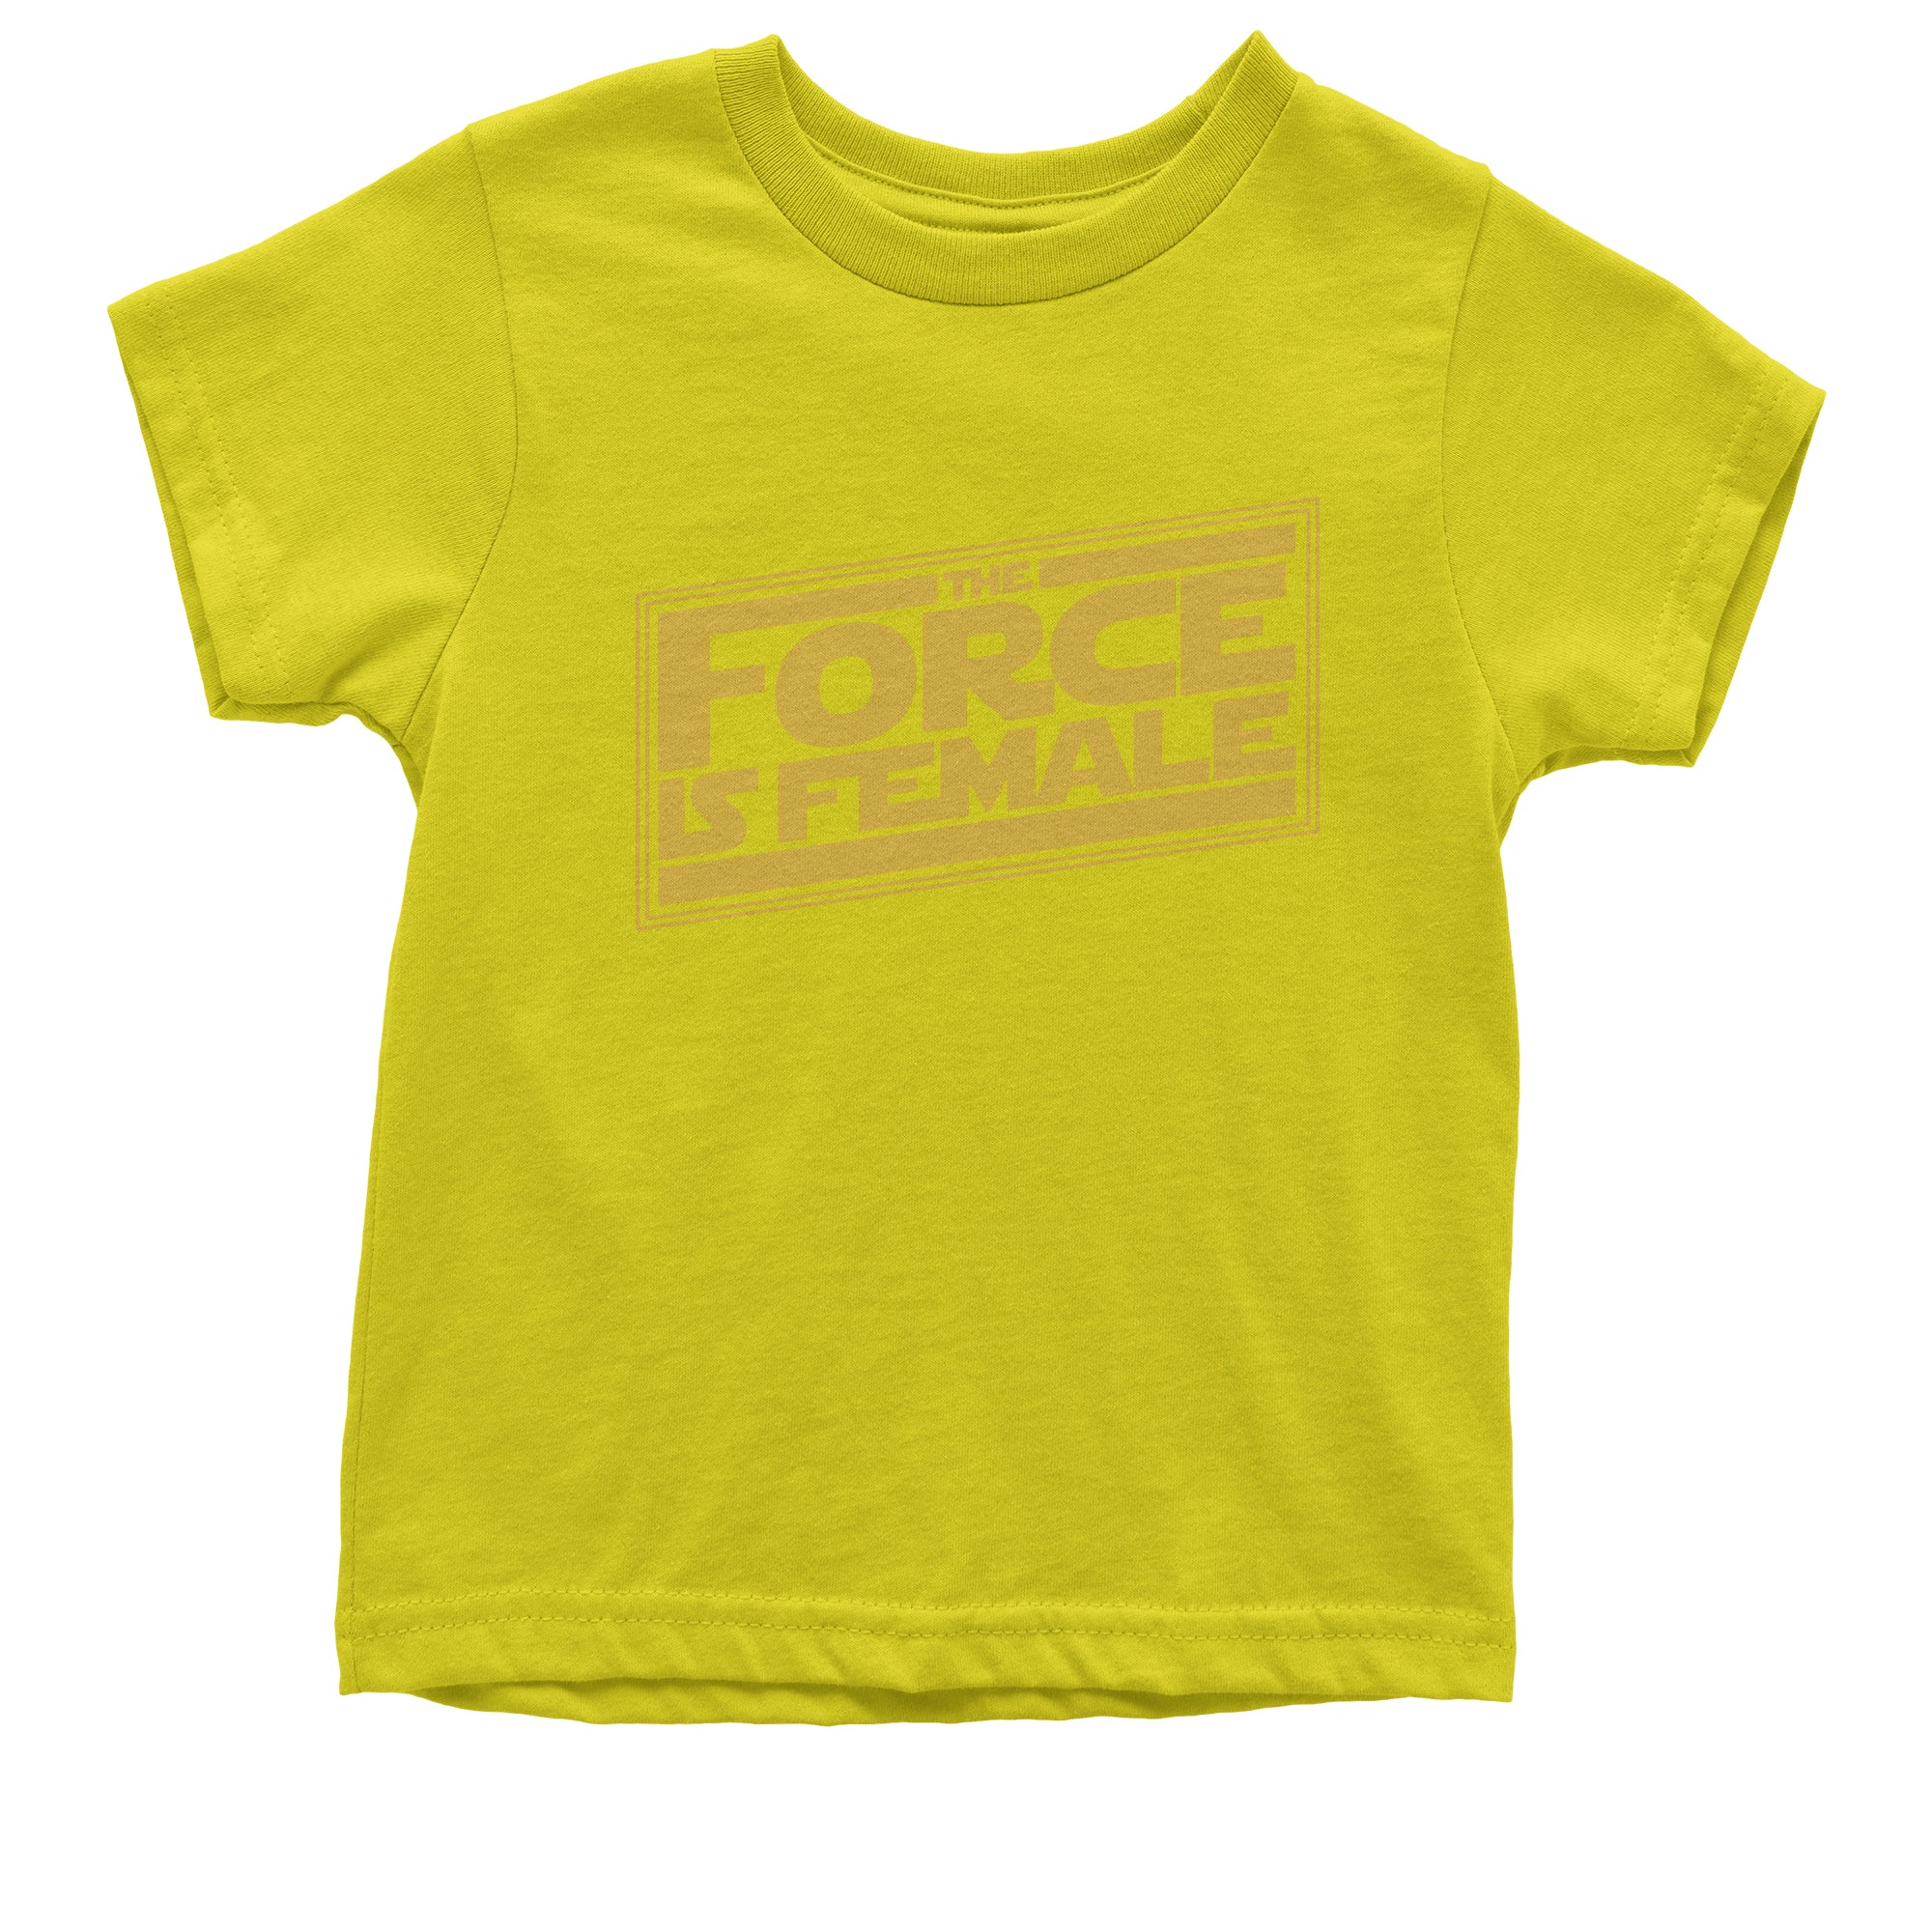 The Force is Female Feminist Star Warship Kid's T-Shirt